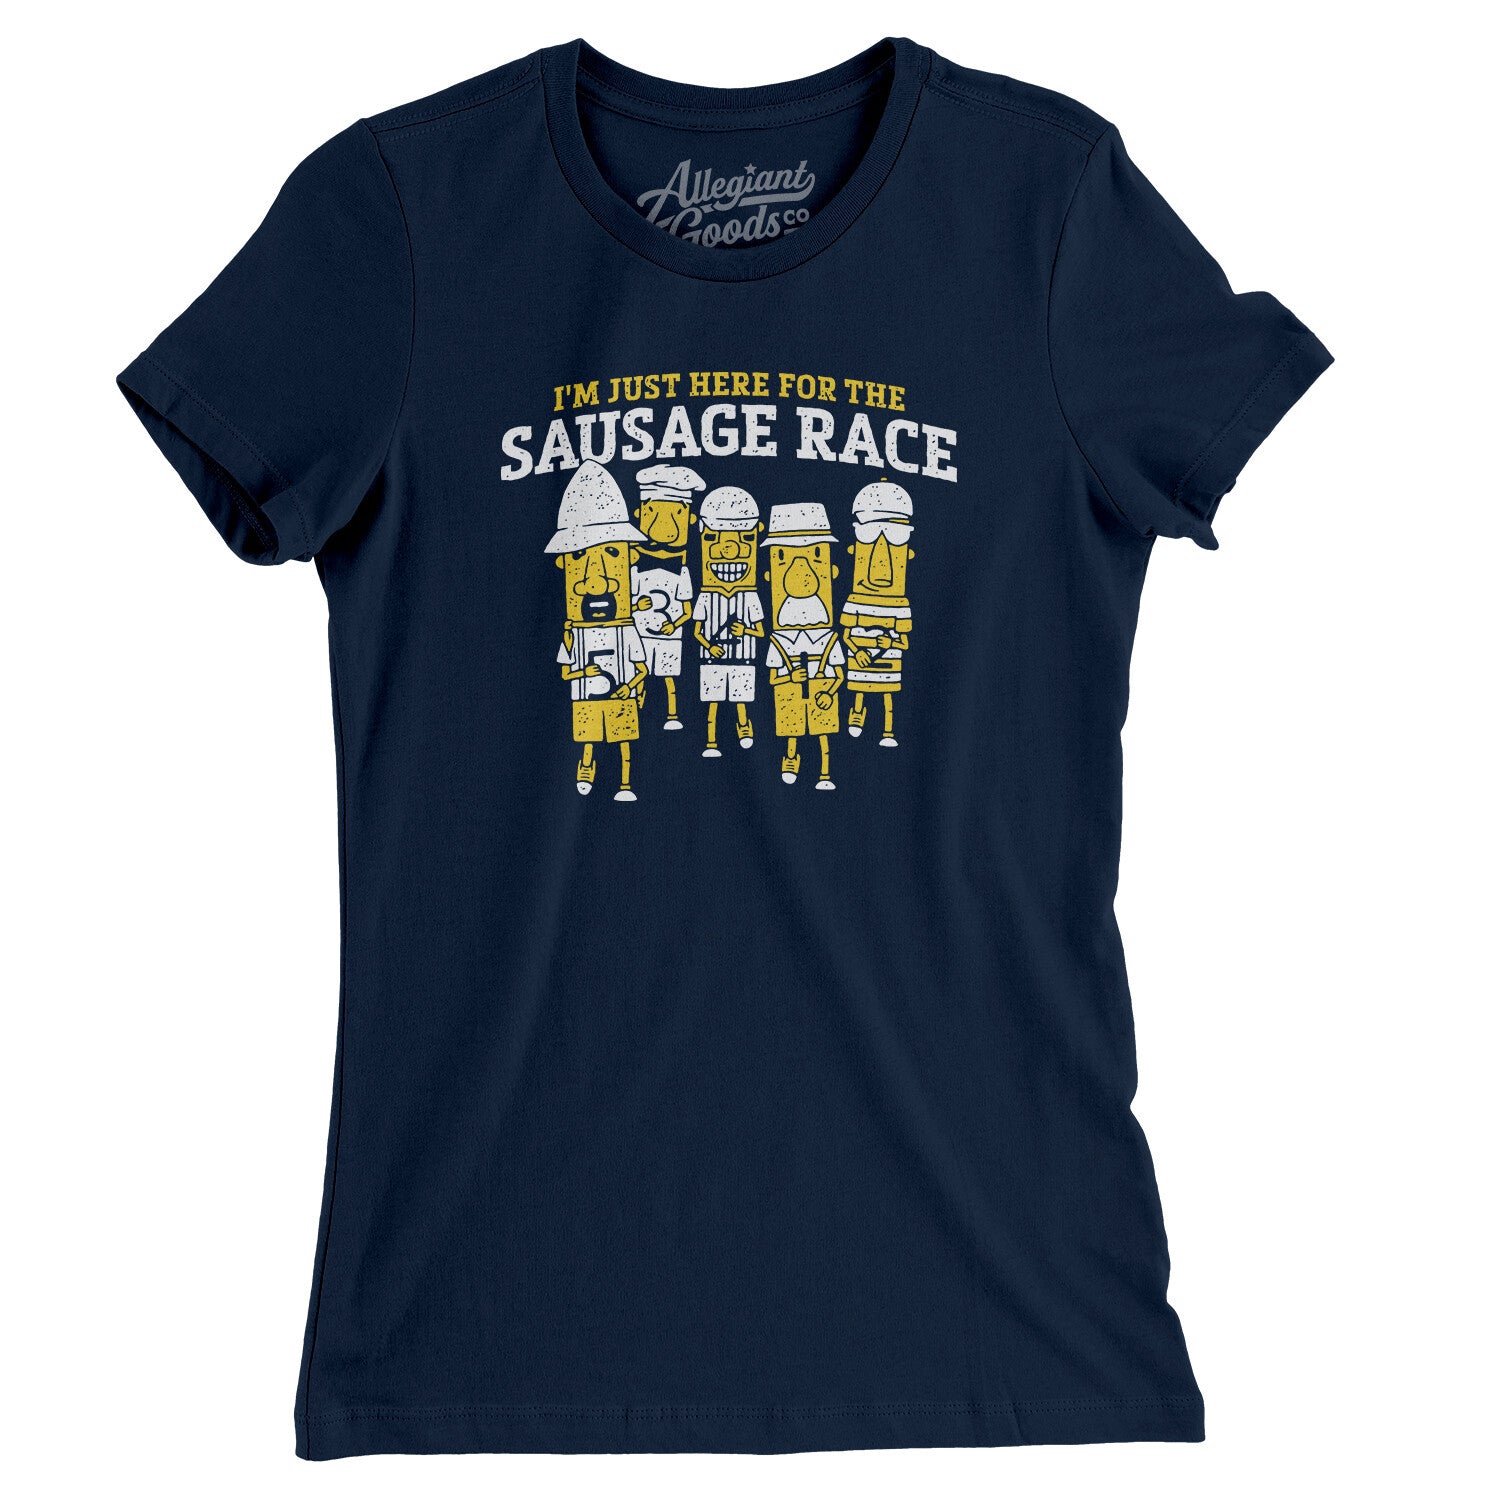 I'm Just Here For The Sausage Race Women's T-Shirt - Allegiant Goods Co.